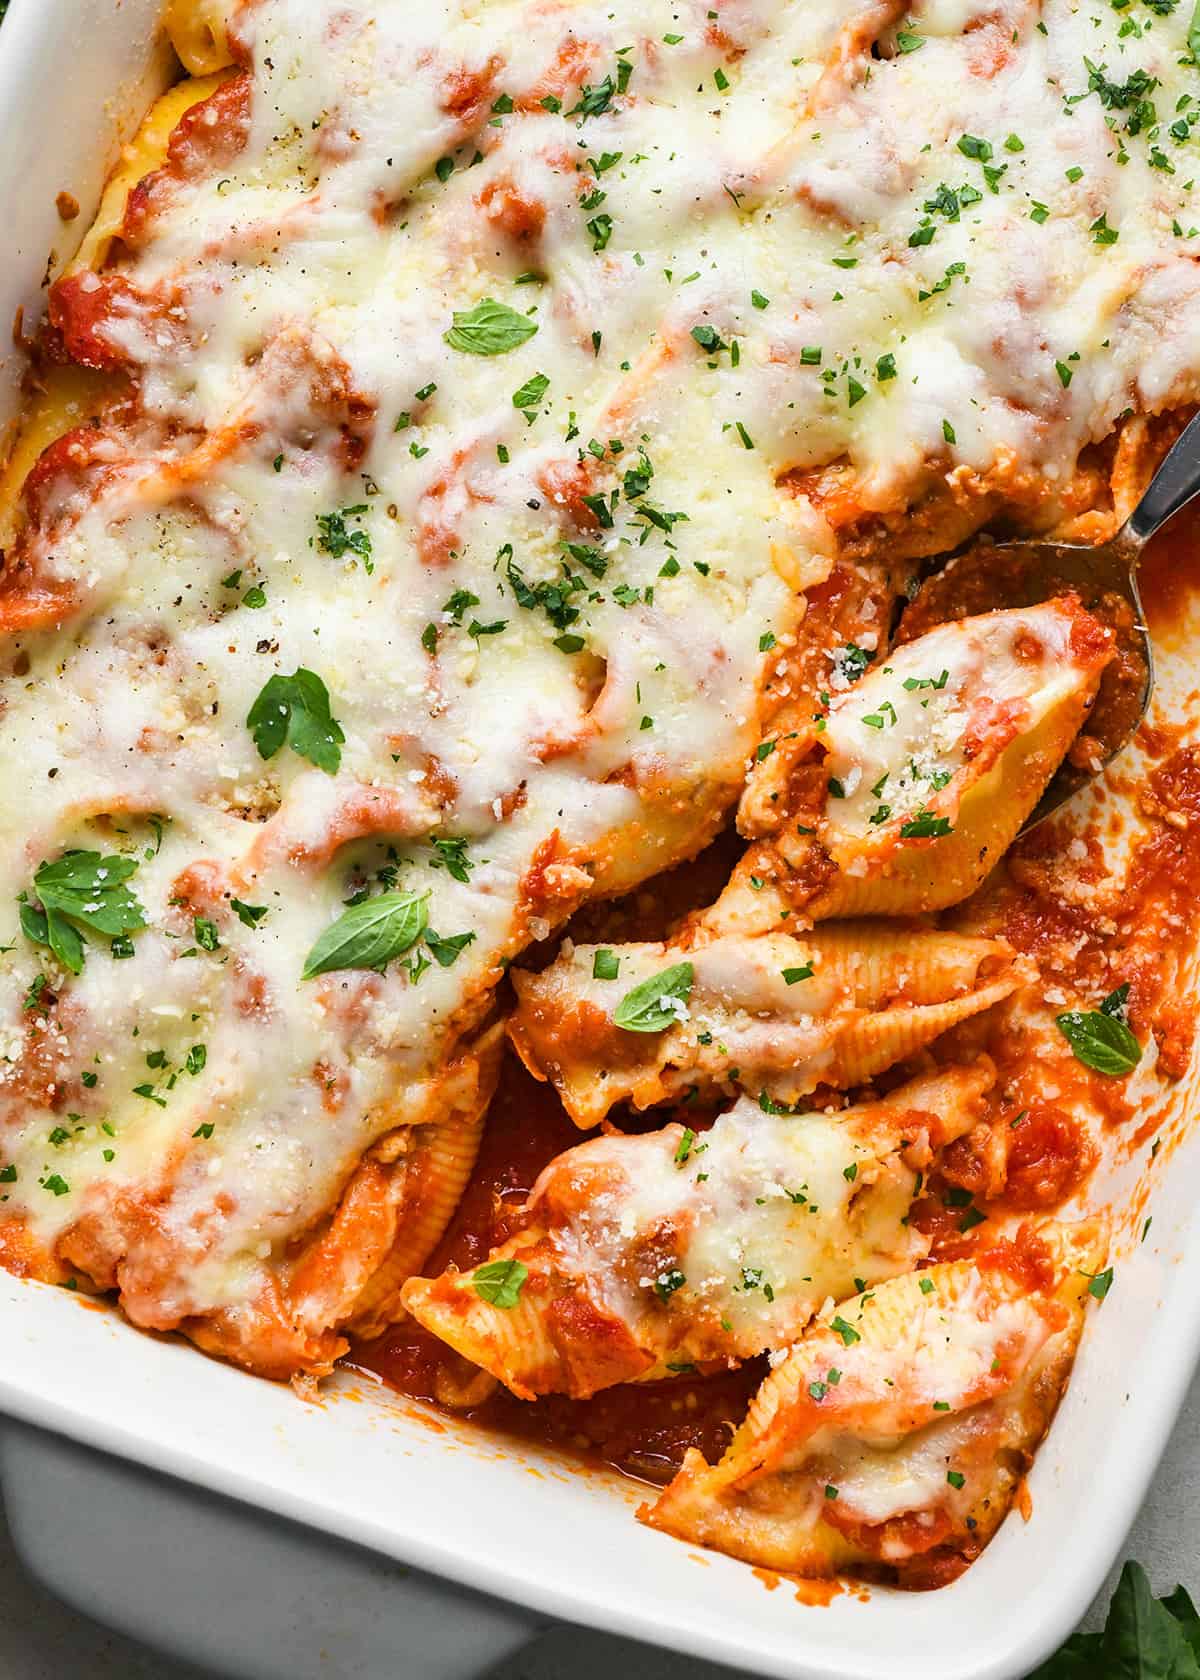 A spoon scooping Stuffed Shells out of a baking dish